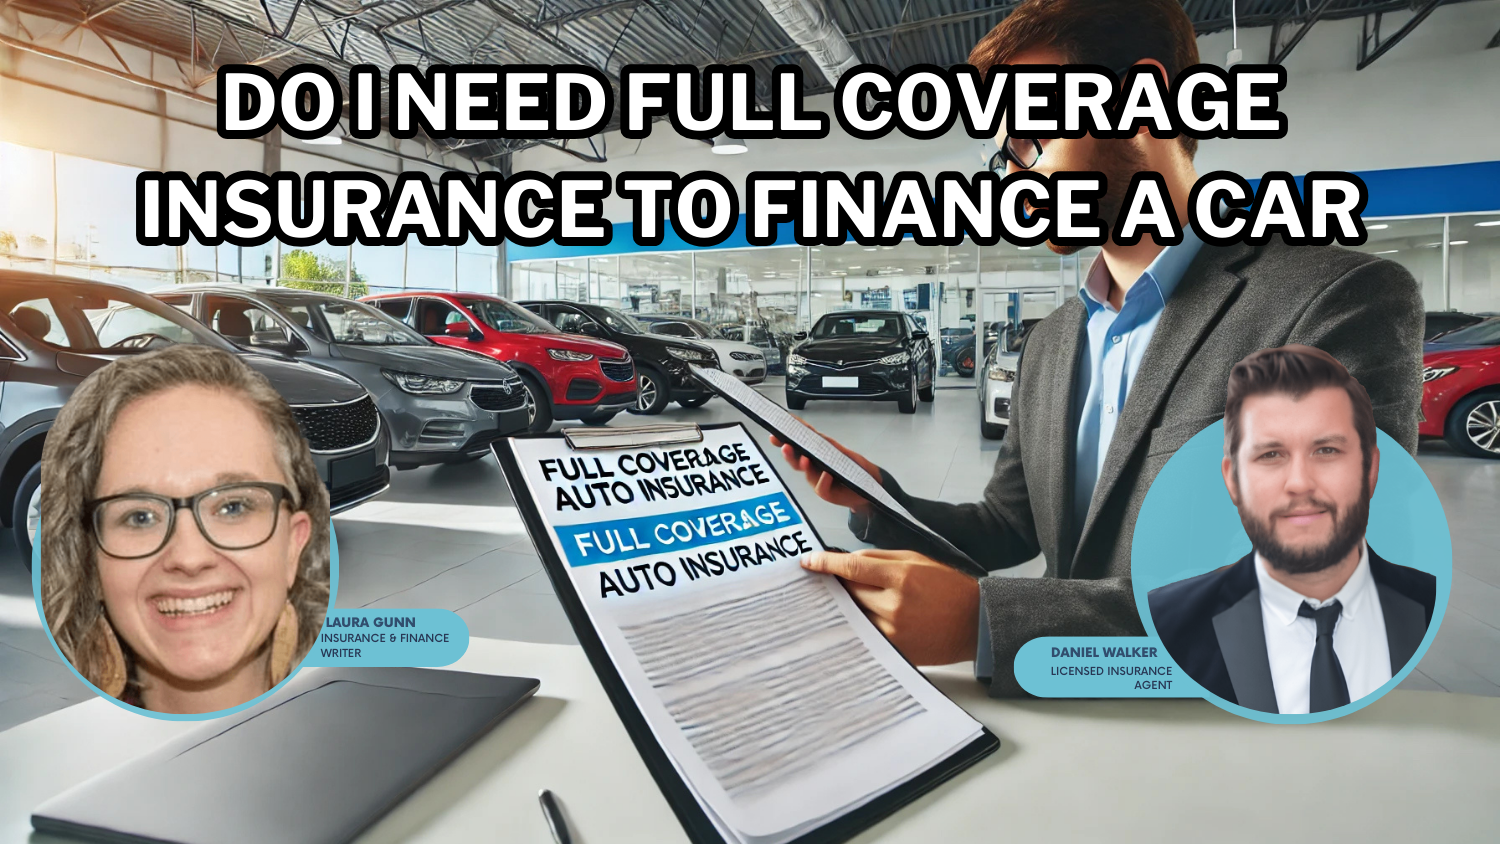 Do I need full coverage insurance to finance a car?